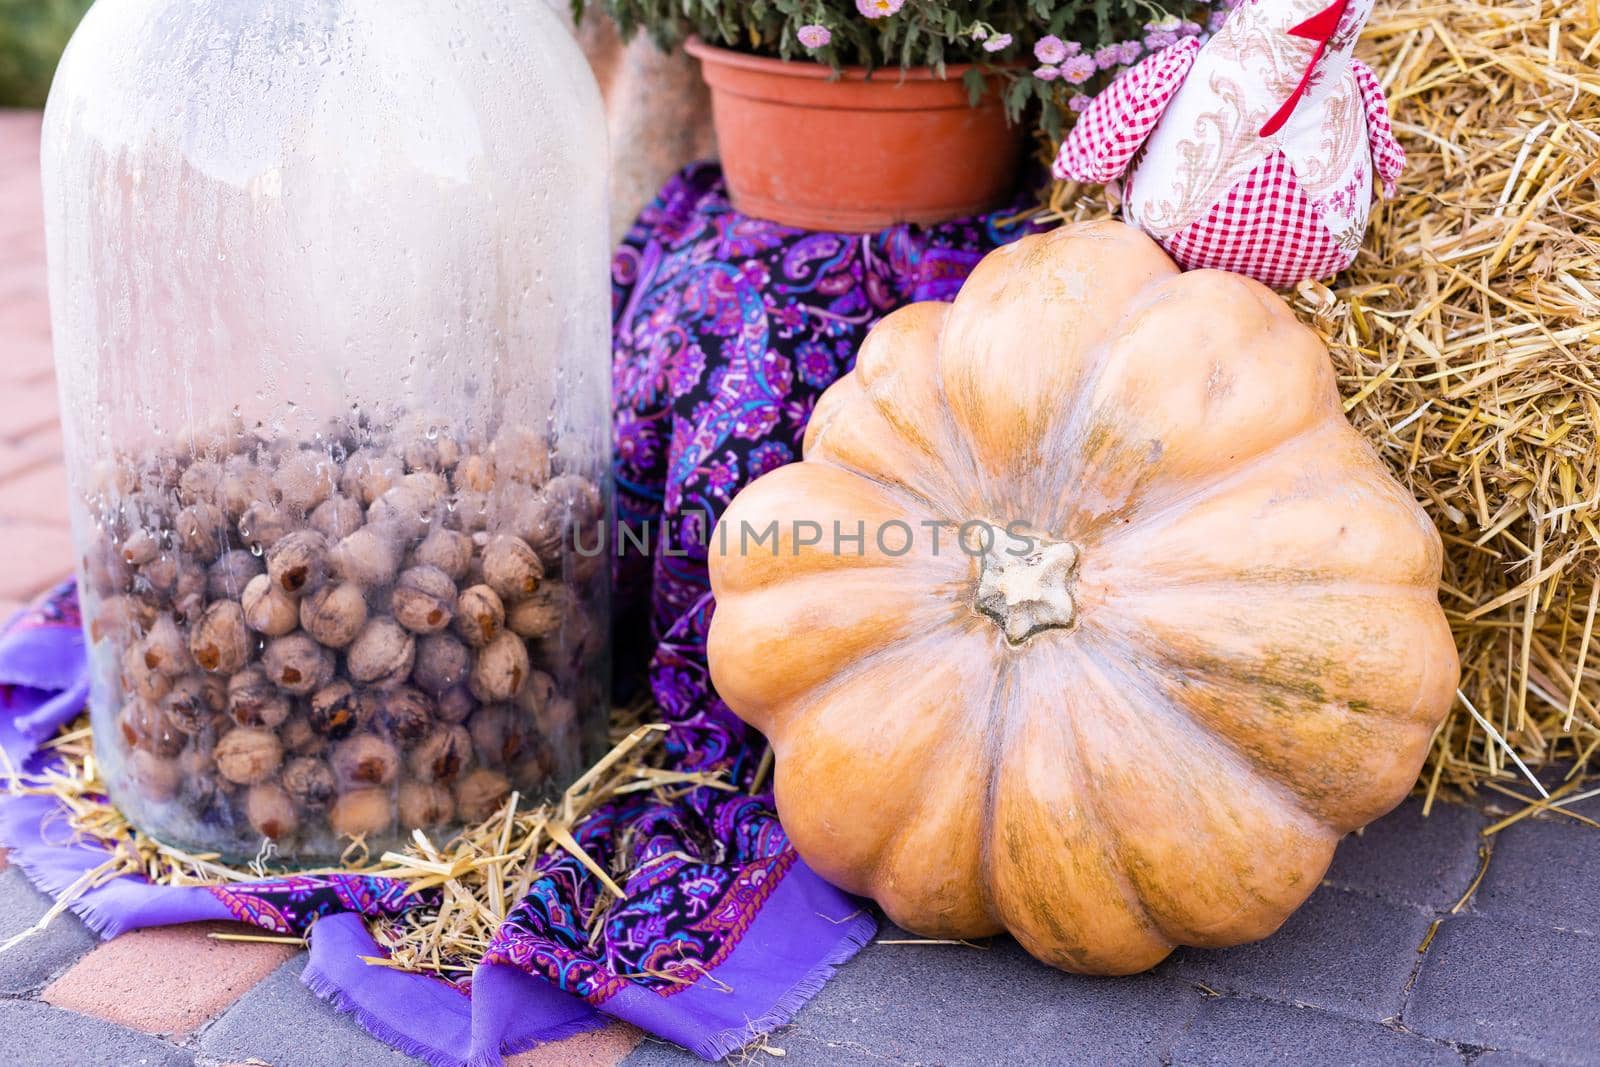 Yellow and orange pumpkins at the fair. Pumpkins in baskets and boxes. Many different pumpkins for sale. Concept of autumn, harvest and celebration by Andelov13